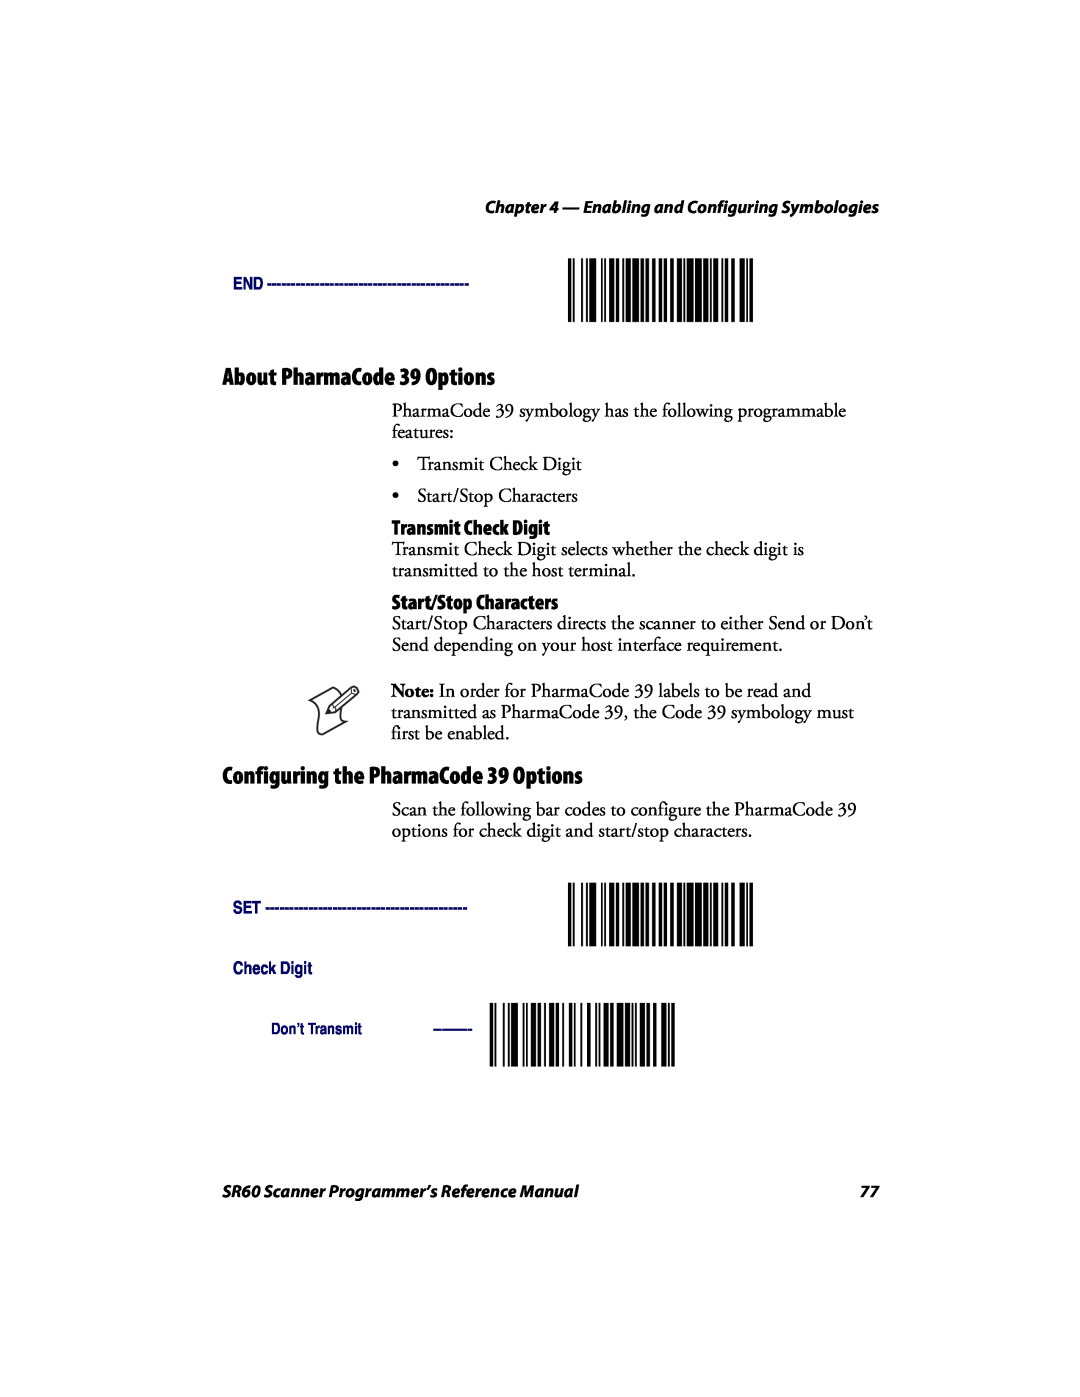 Intermec SR60 manual About PharmaCode 39 Options, Configuring the PharmaCode 39 Options, Transmit Check Digit 